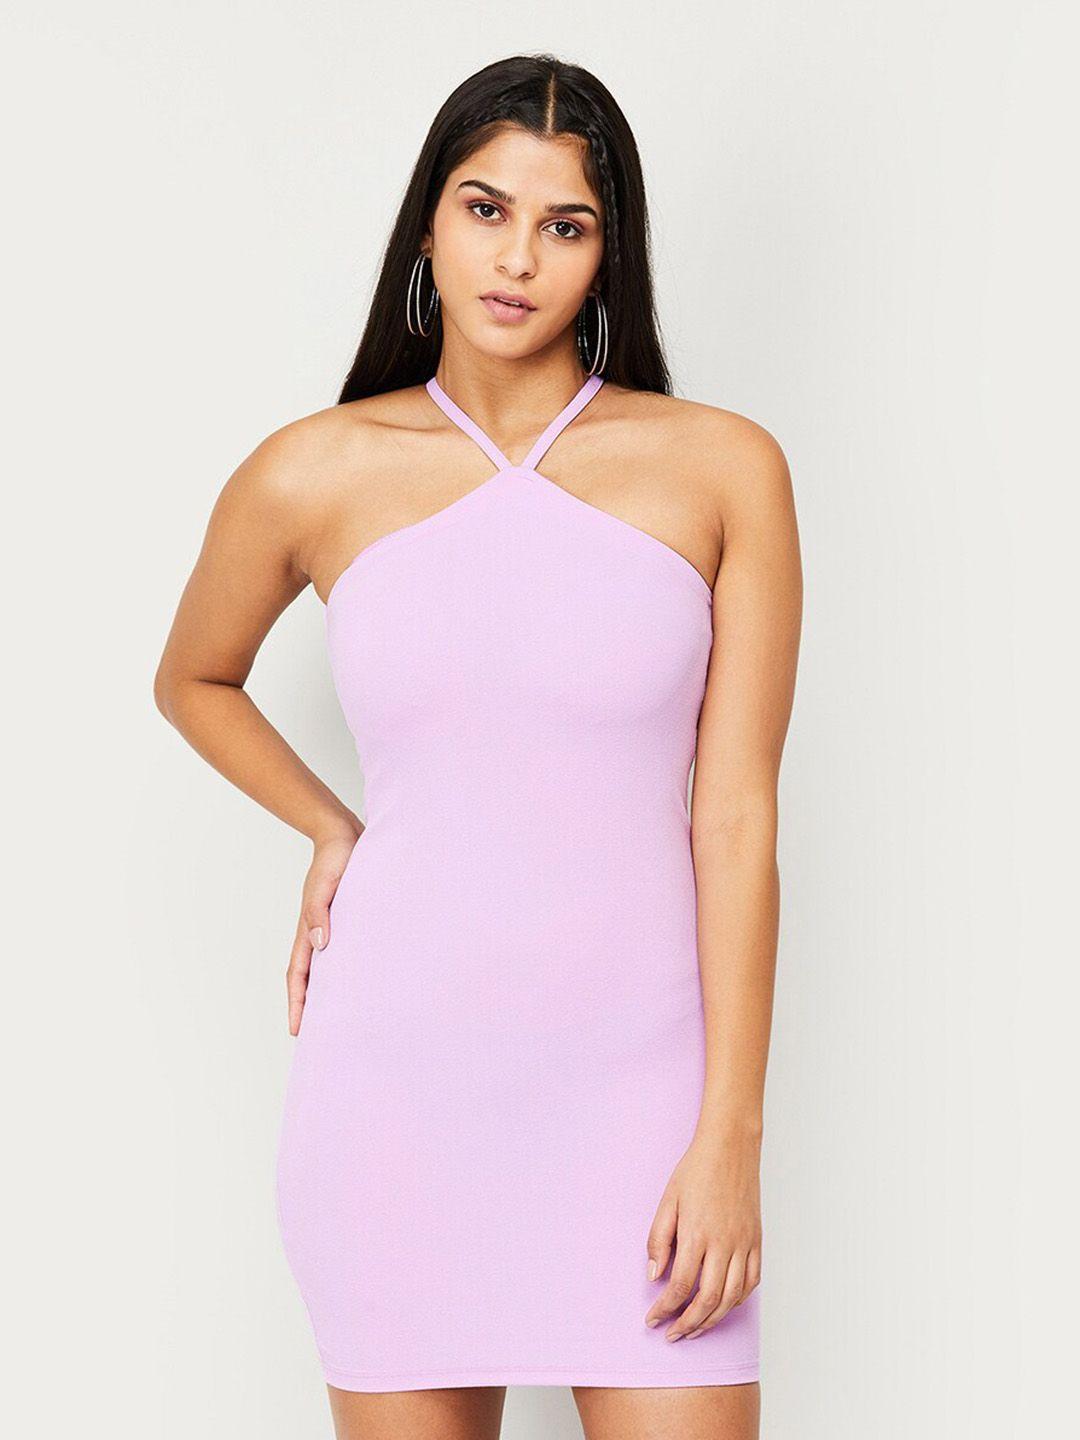 ginger-by-lifestyle-halter-neck-bodycon-mini-dress